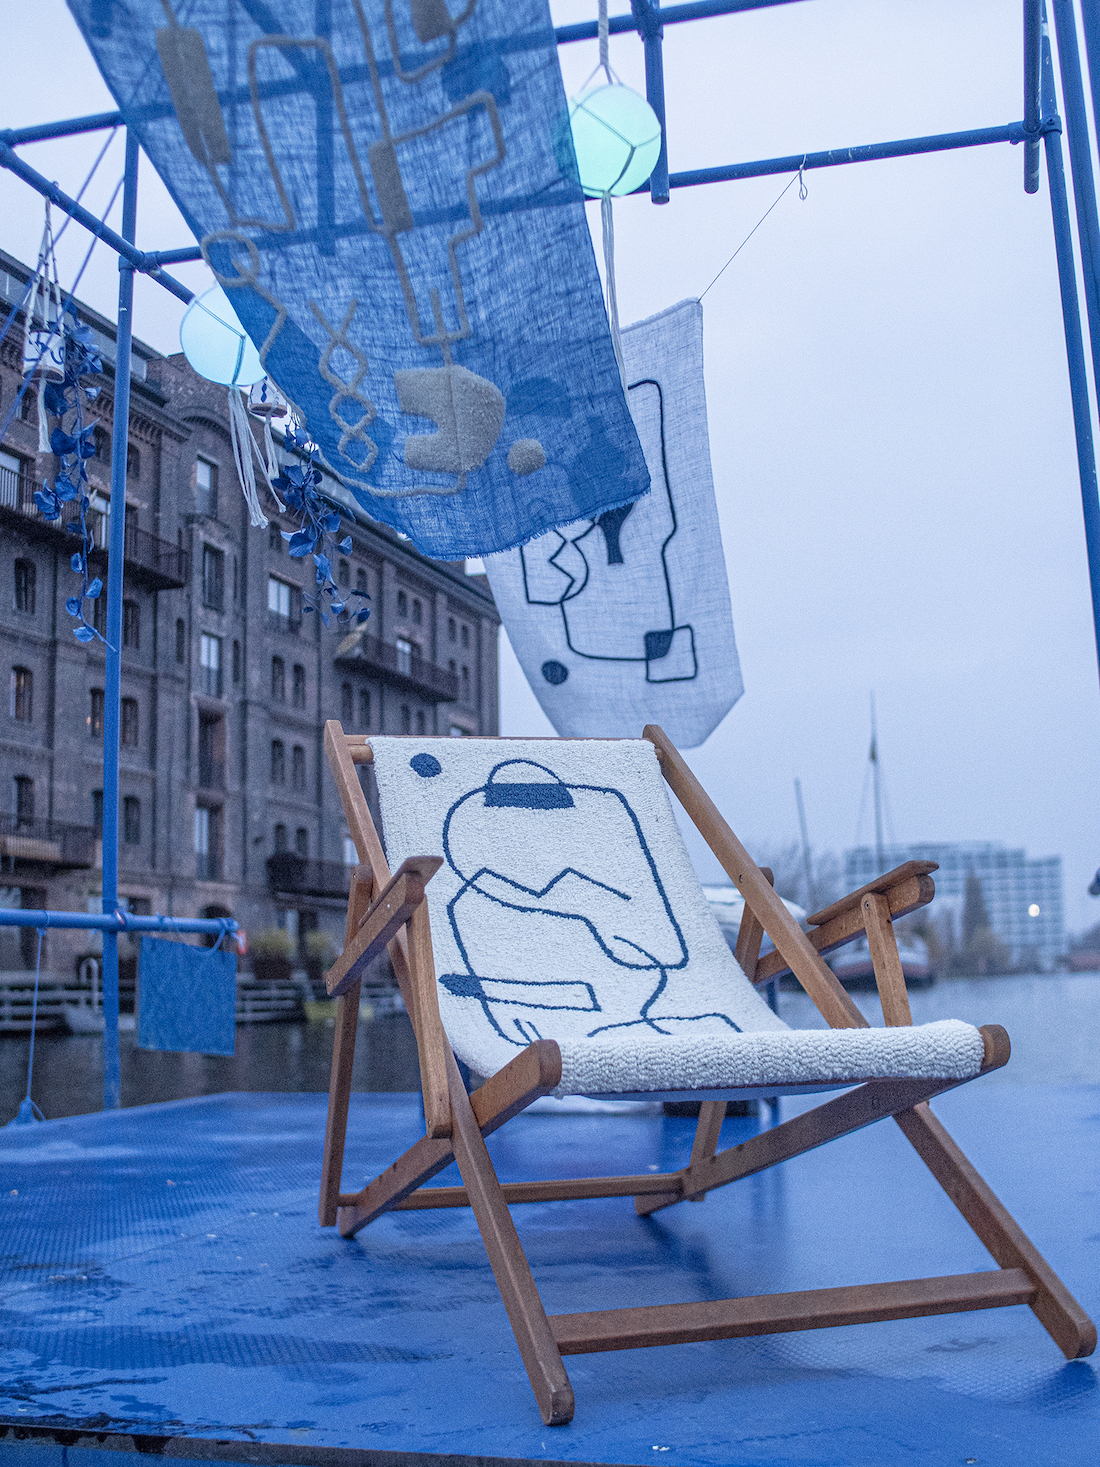 Deck chair and art install by ito